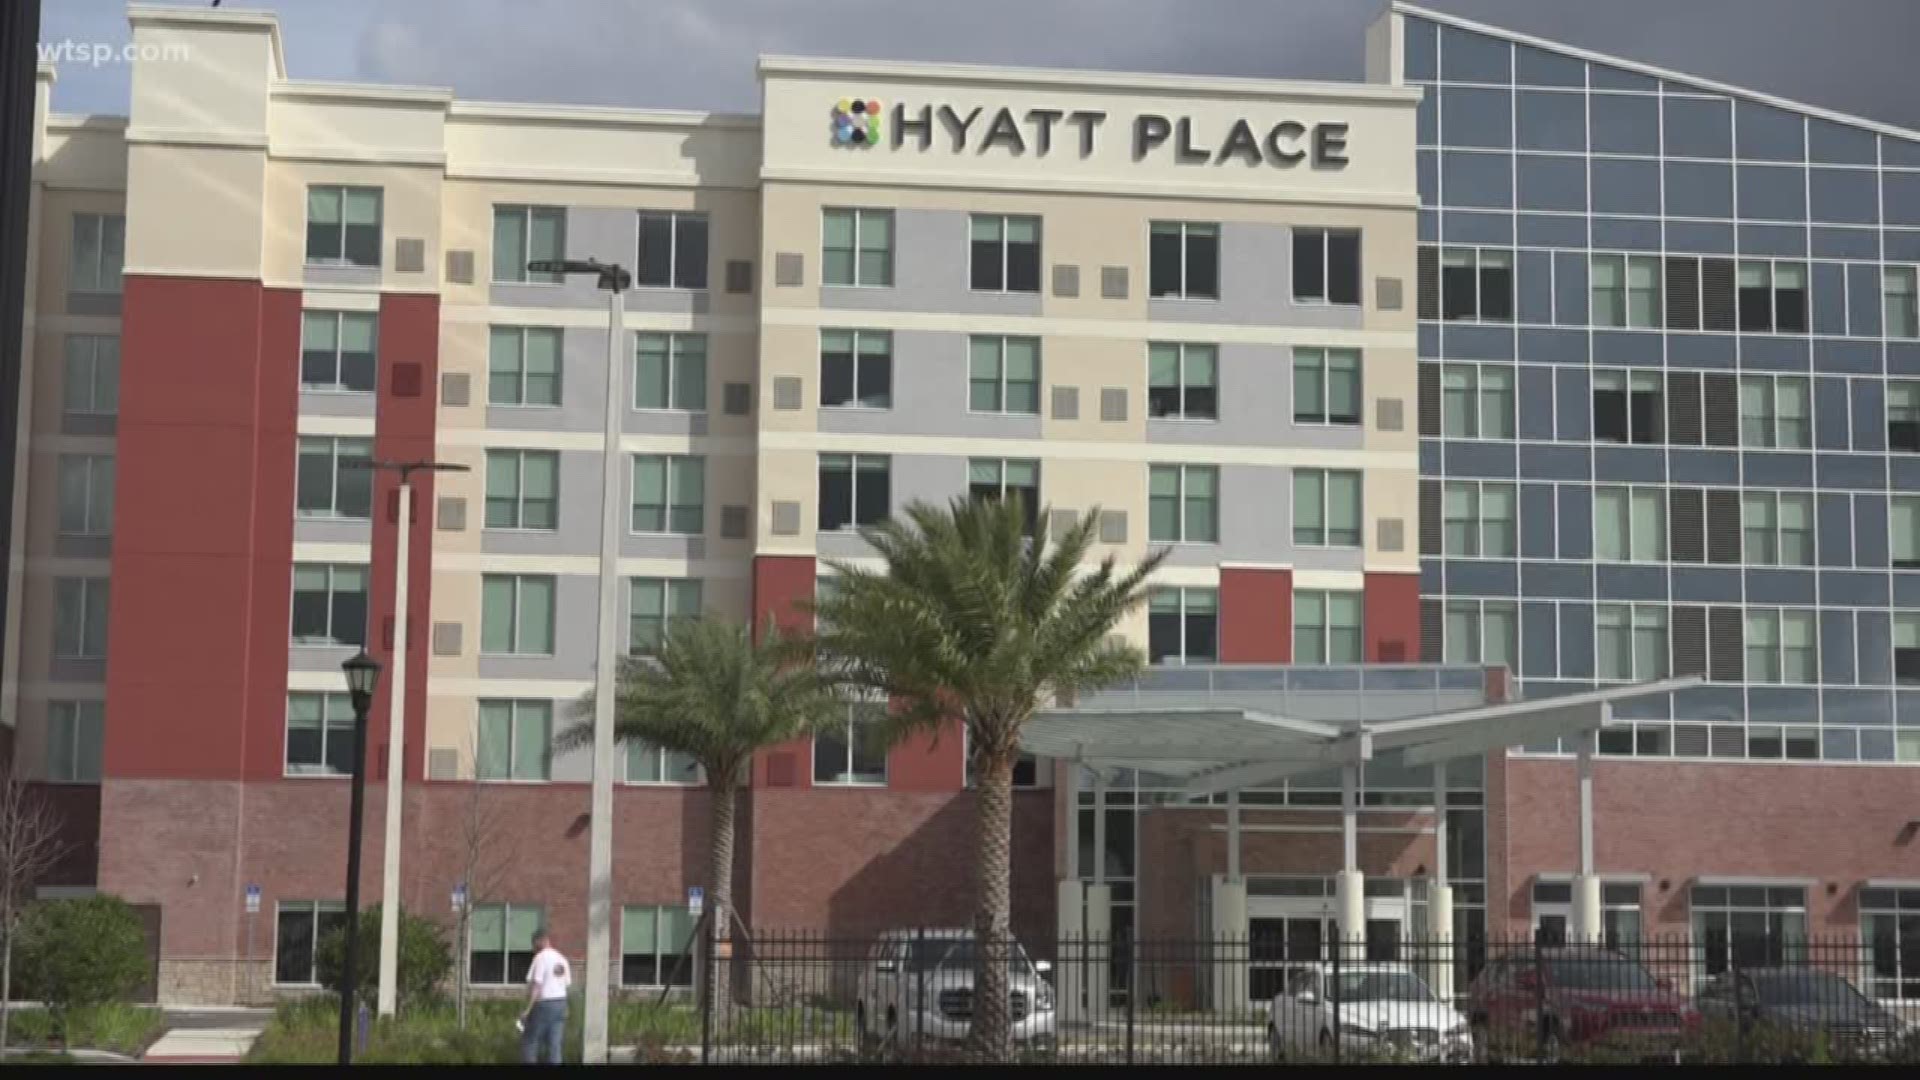 The Hyatt Place says it was given a wrong number and will refund anyone who asks.